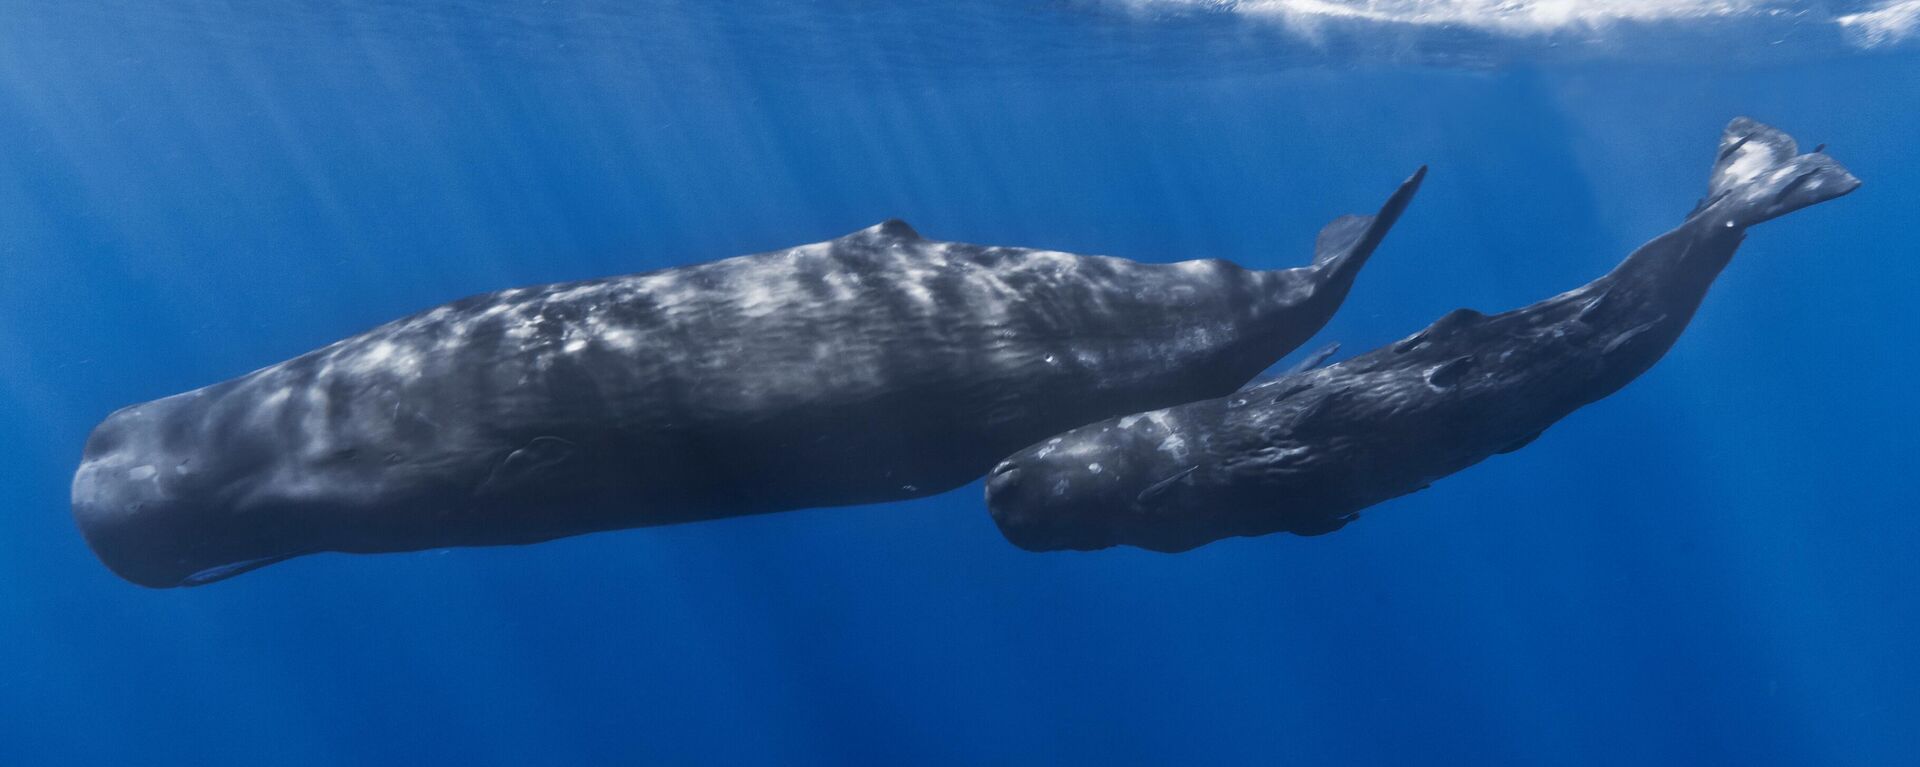 A mother sperm whale and her calf off the coast of Mauritius. The calf has remoras attached to its body. - Sputnik International, 1920, 06.07.2022